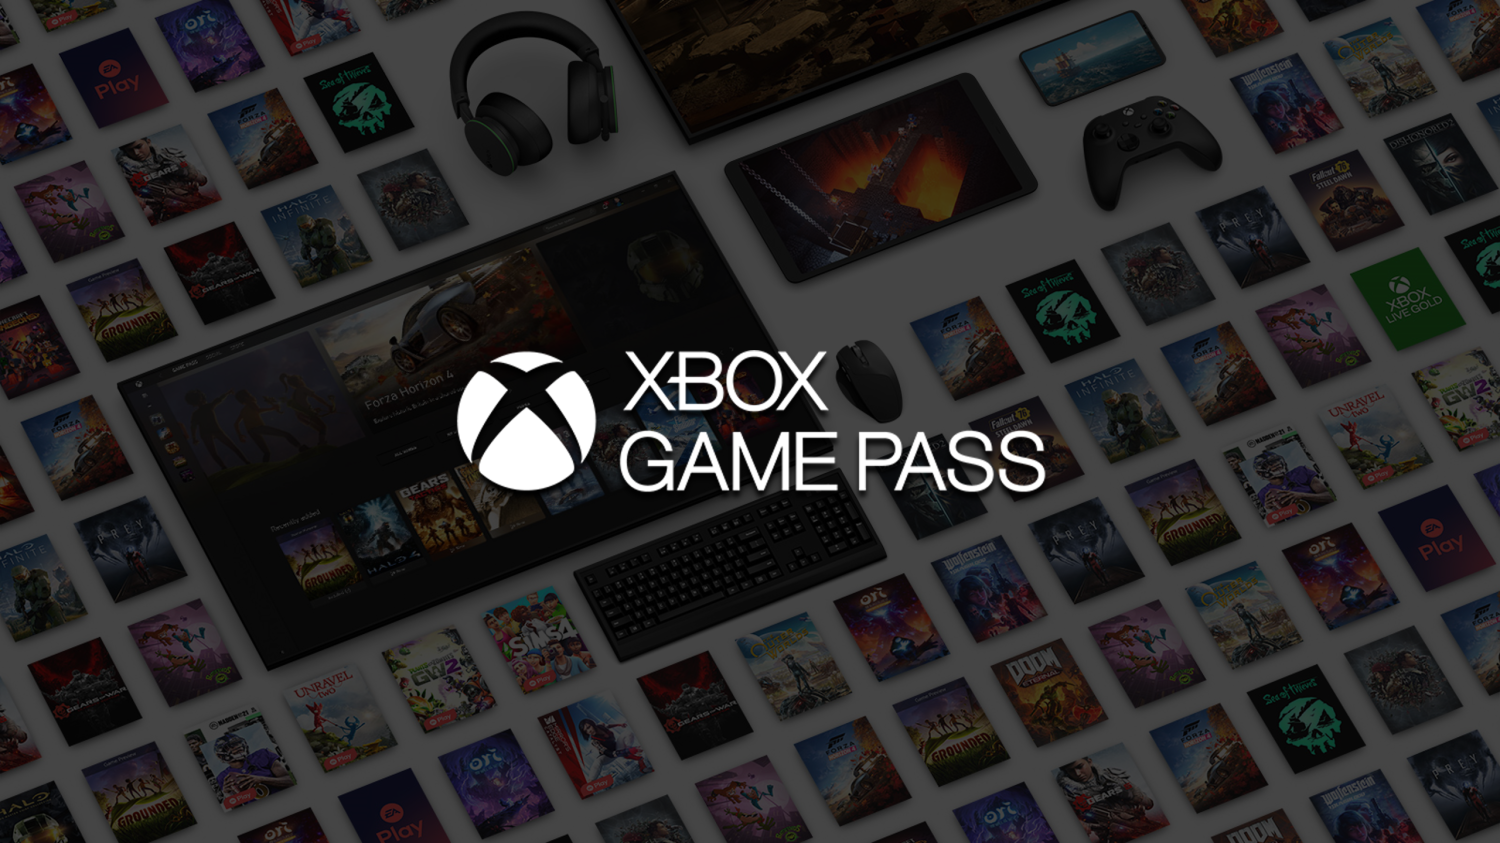 Microsoft reveals Game Pass on consoles earnings during Brazil's CADE probe